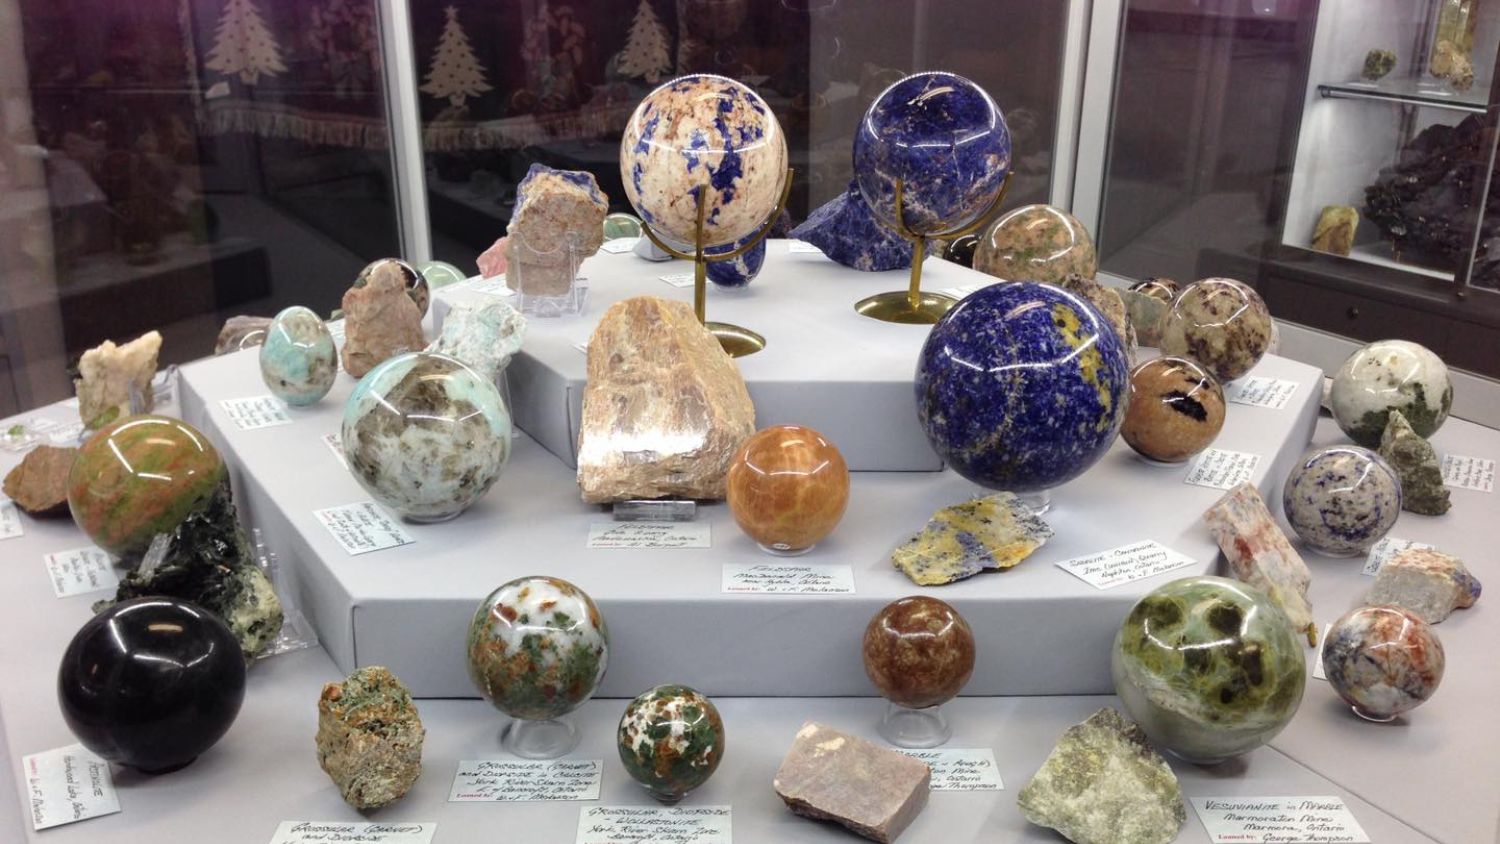 Photo: Display of Ontario specimens and spheres in the Bancroft Mineral Museum